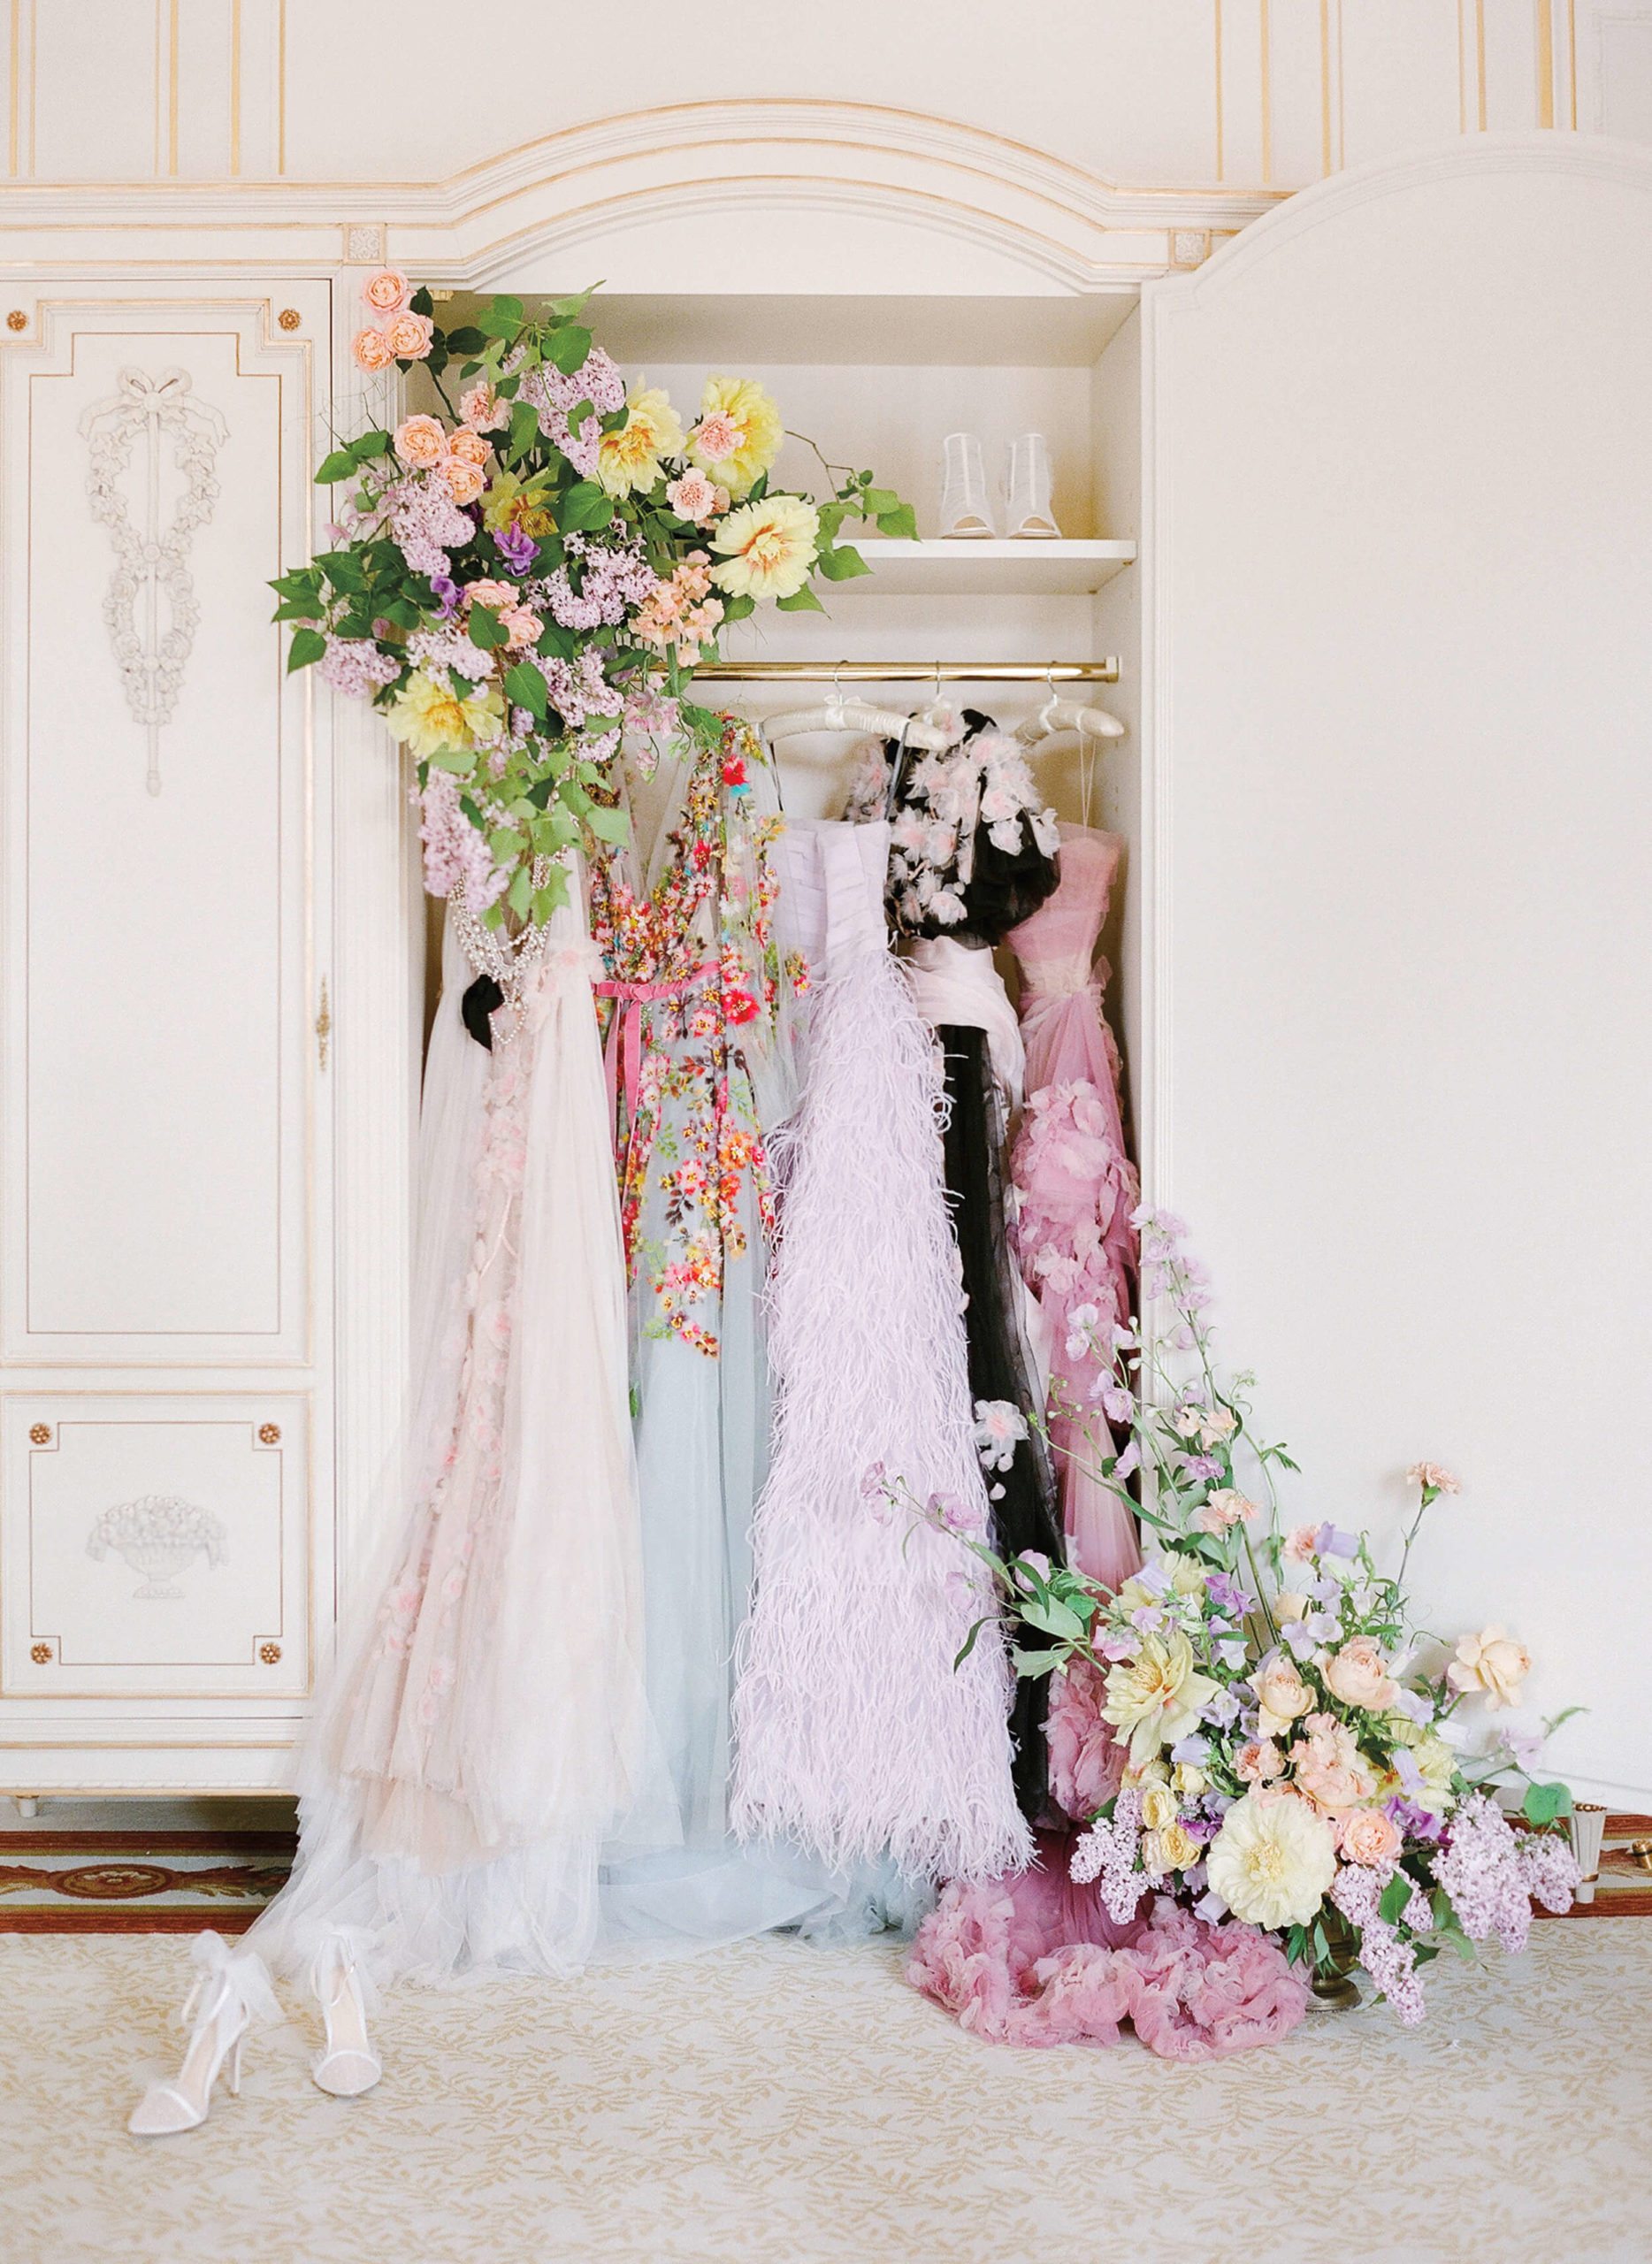 hiring a bridal stylist for access to couture gowns